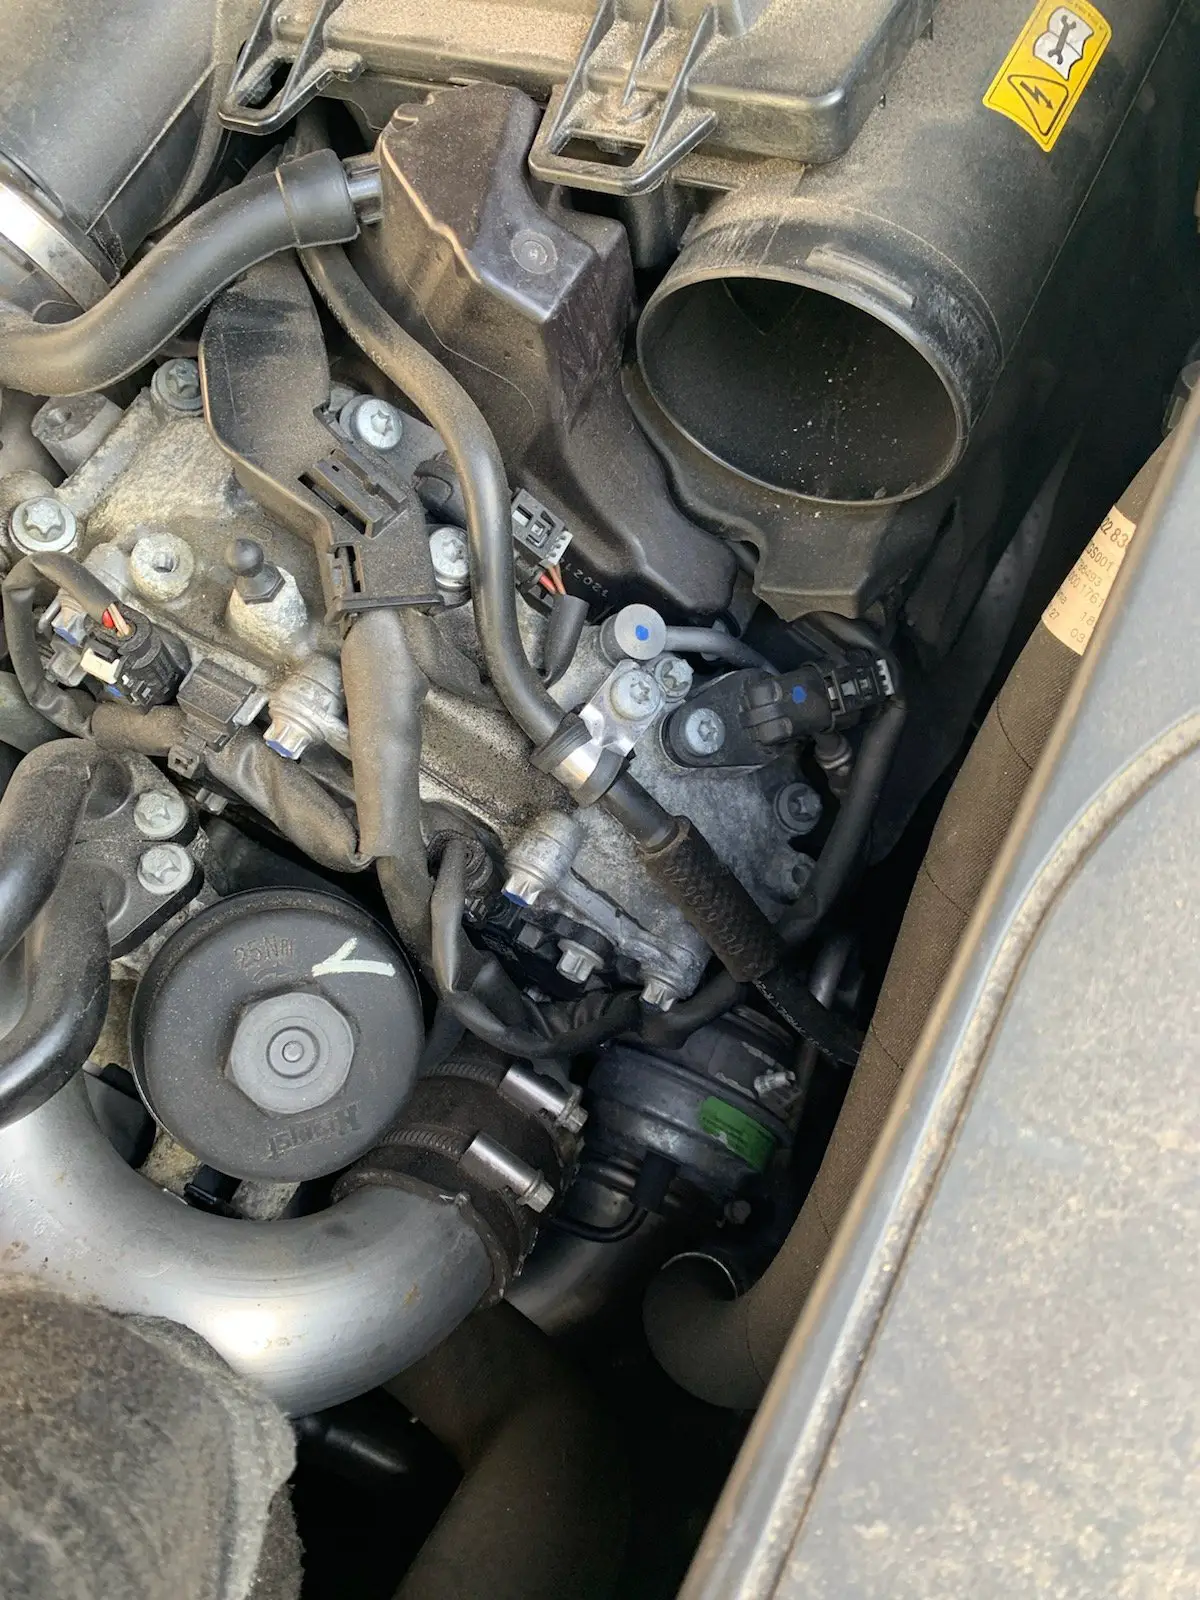 I hear a slight noise in car when turning the steering ...